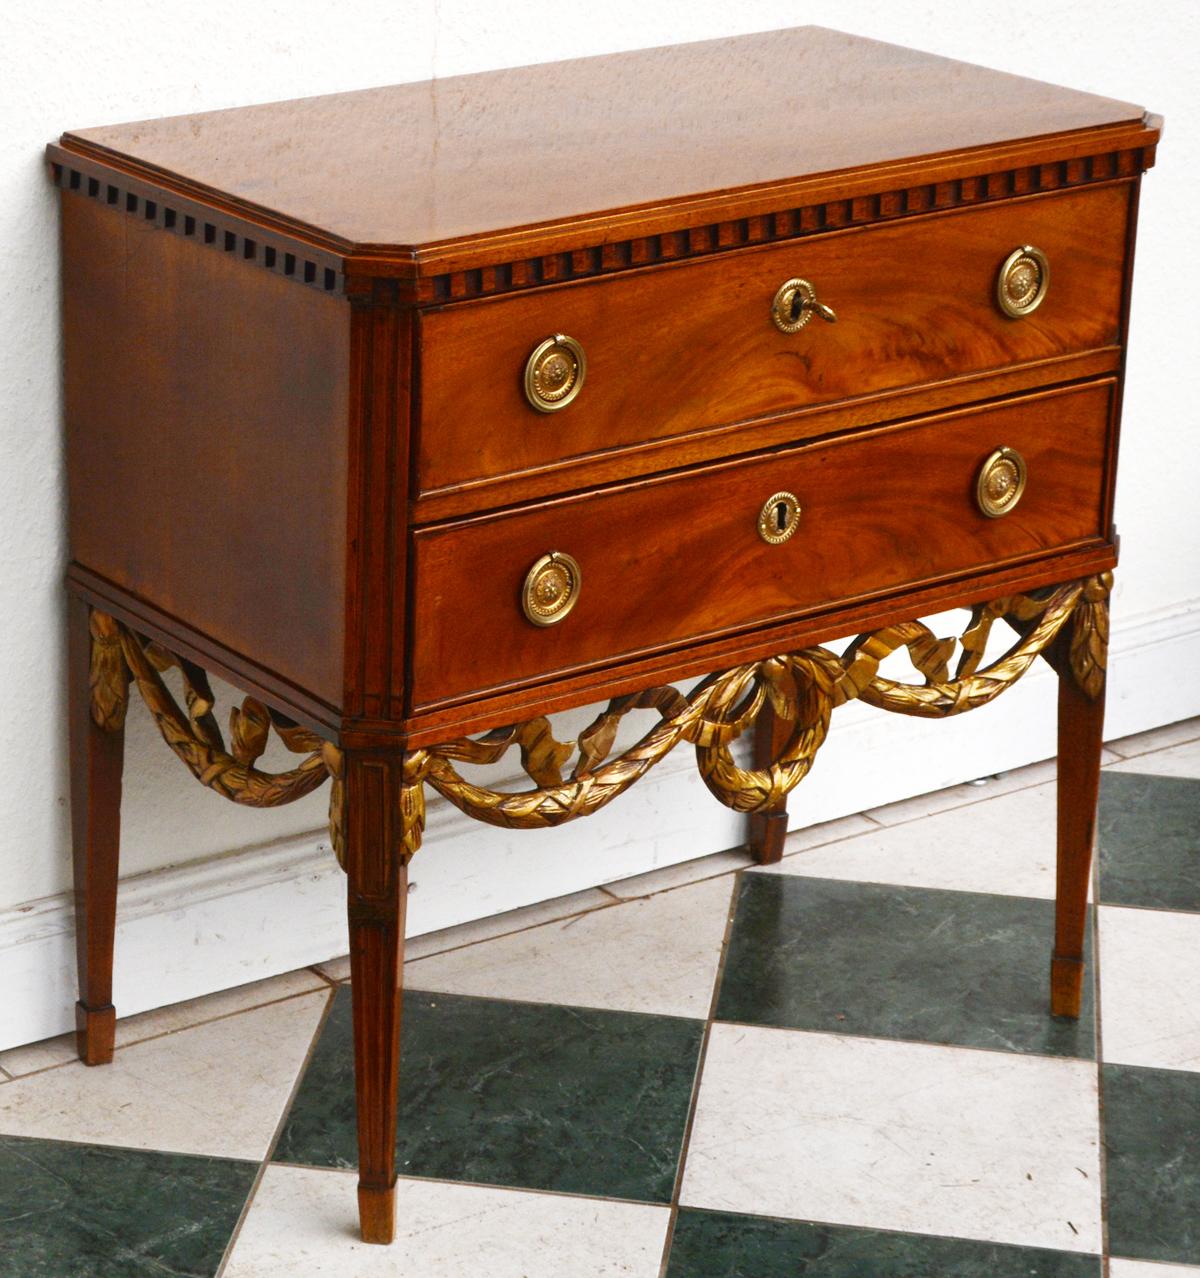 Neoclassicism dresser, Altona, Hamburg, Germany, 1800s. Made of mahogany. Rare, typical local design. 

High, tapered square legs on foot blocks. Body with chamfered sides. Gold-plated grip rings and fittings. Gilded frame carving in the form of a